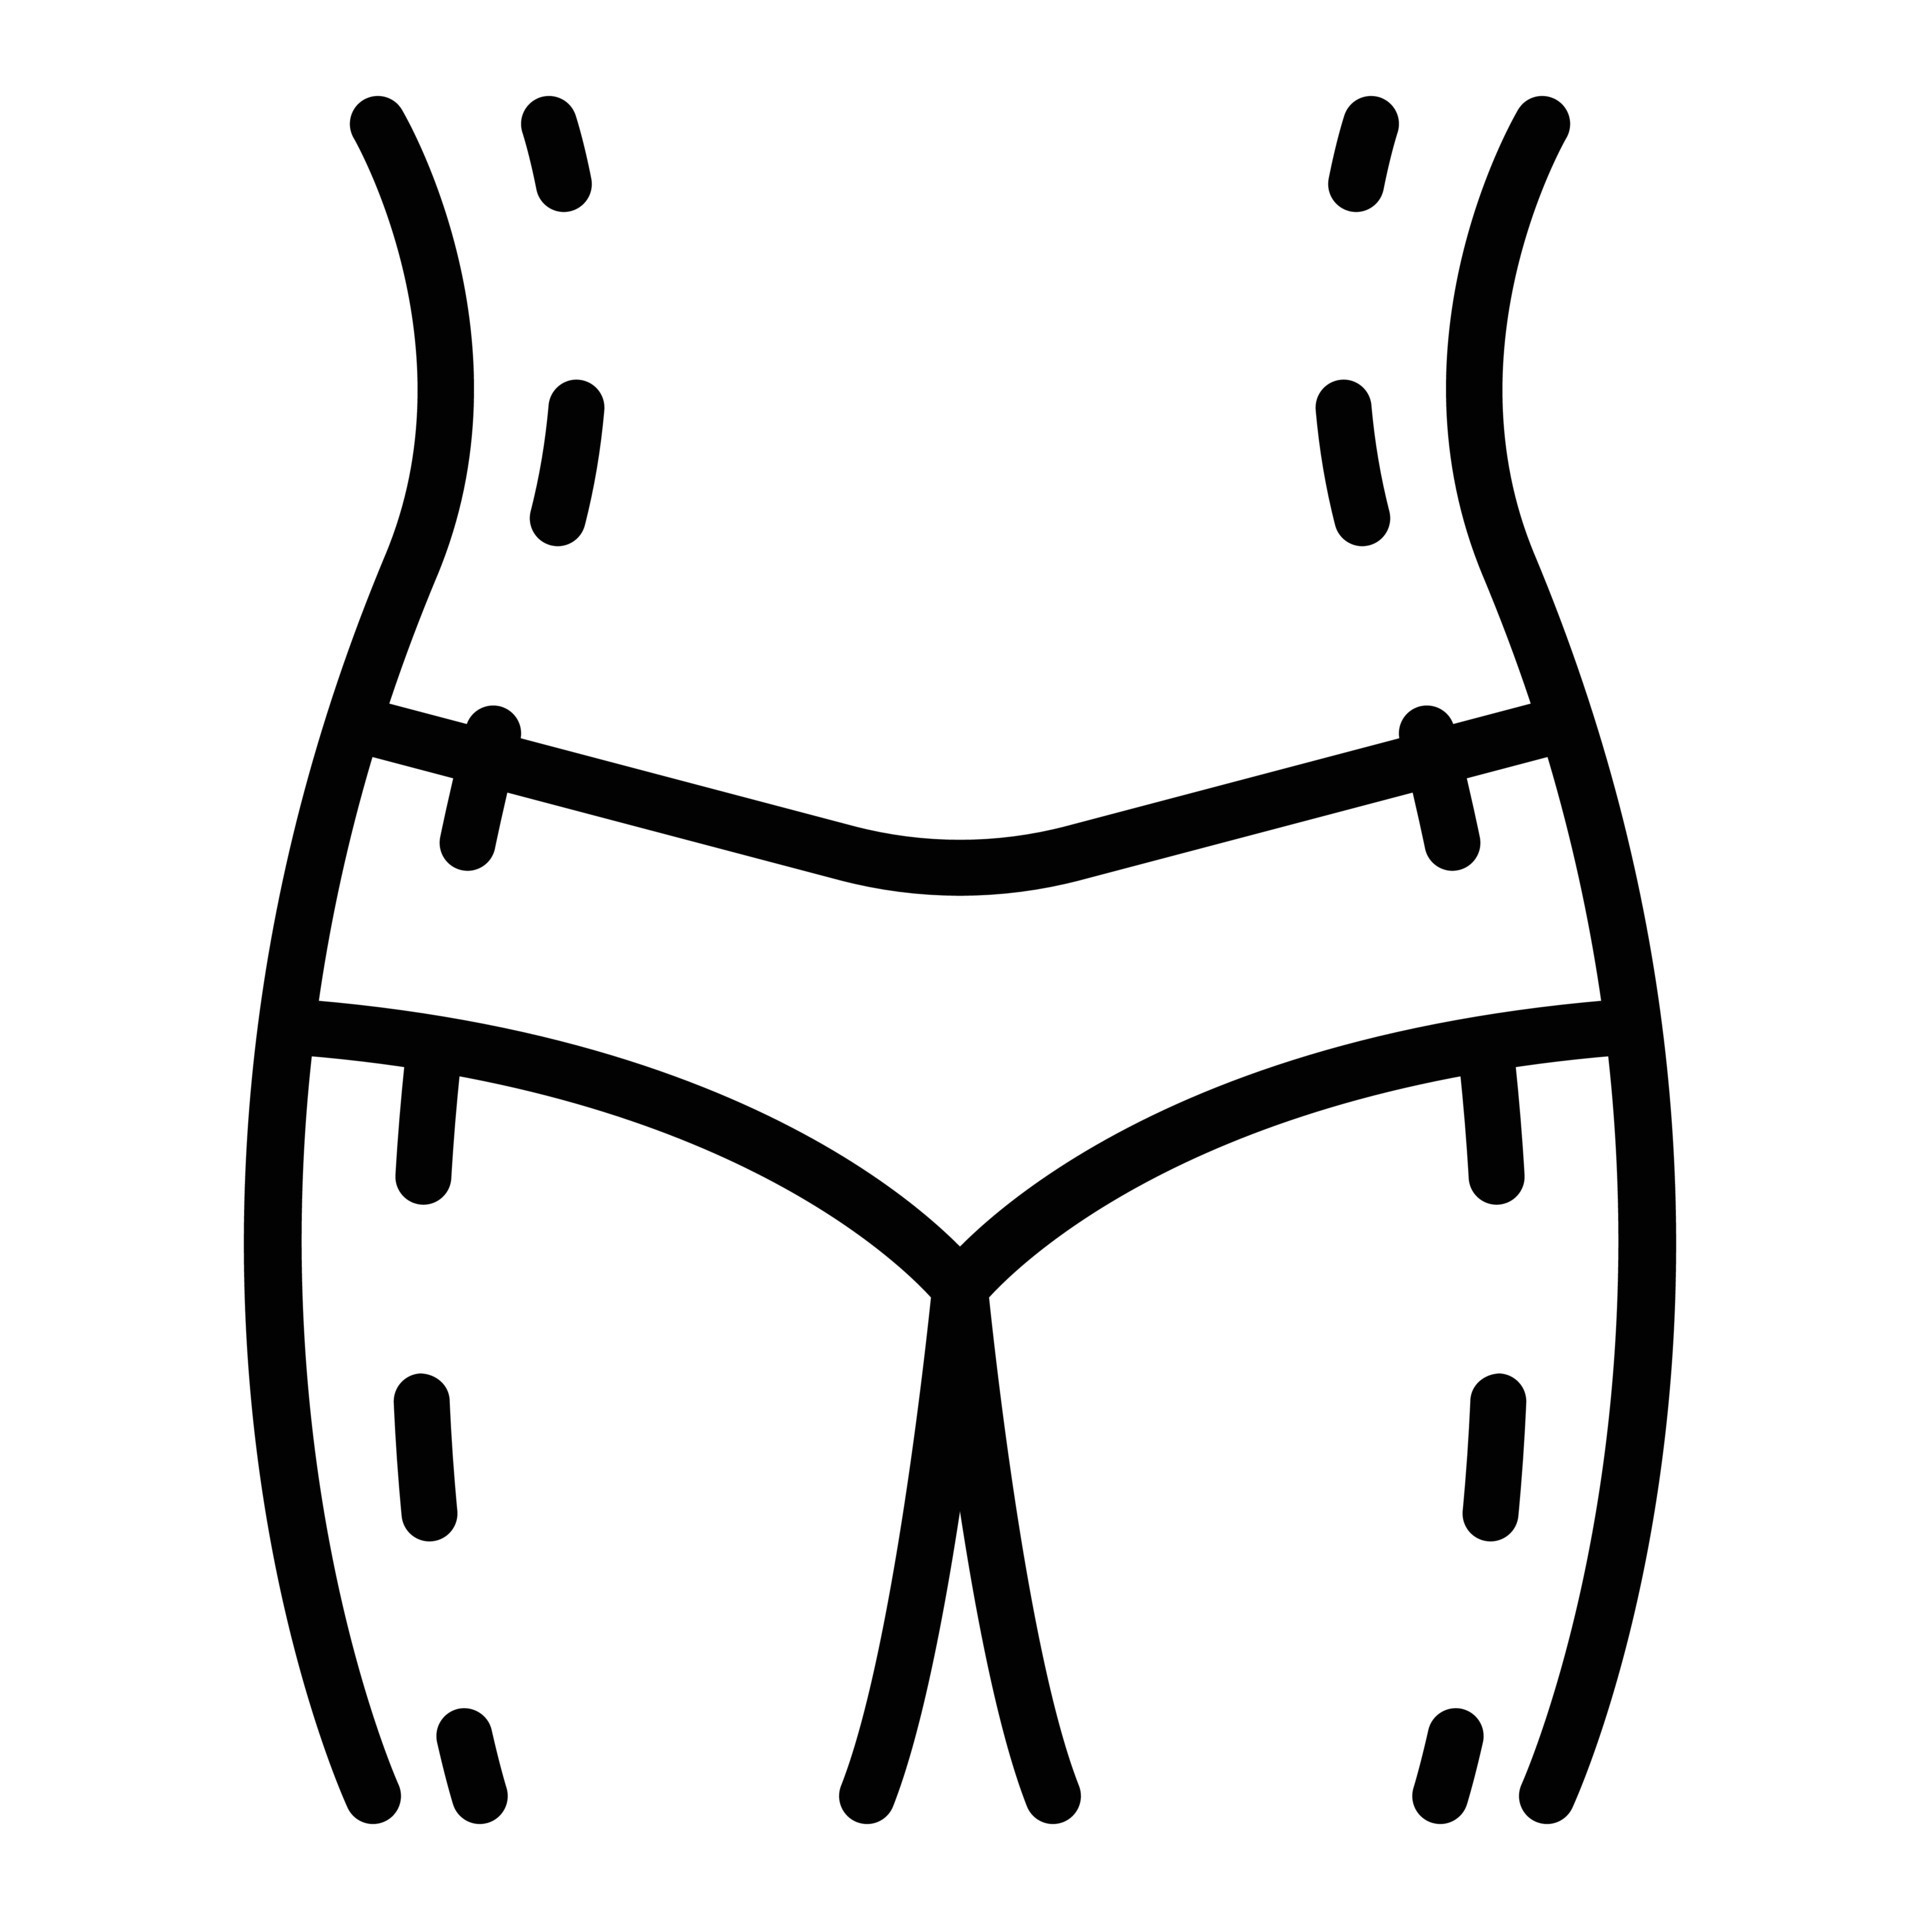 https://static.vecteezy.com/system/resources/previews/015/091/214/original/loss-breast-icon-outline-female-beauty-vector.jpg